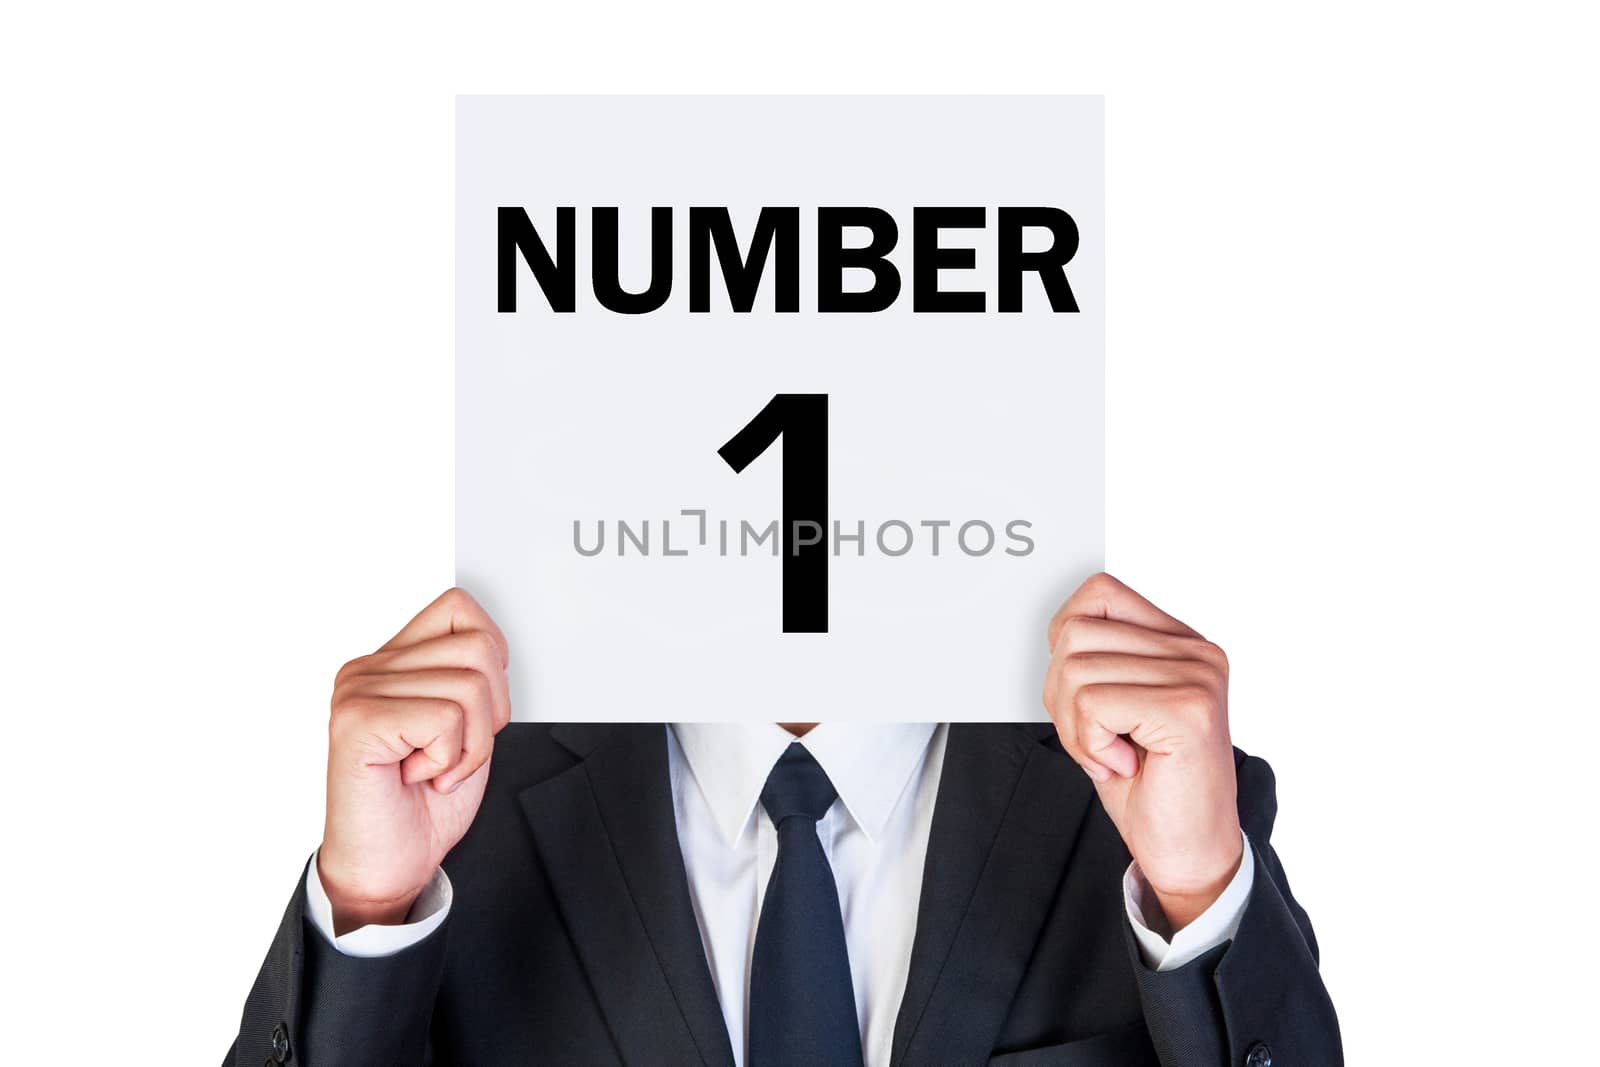 Say Number One on paper by happystock